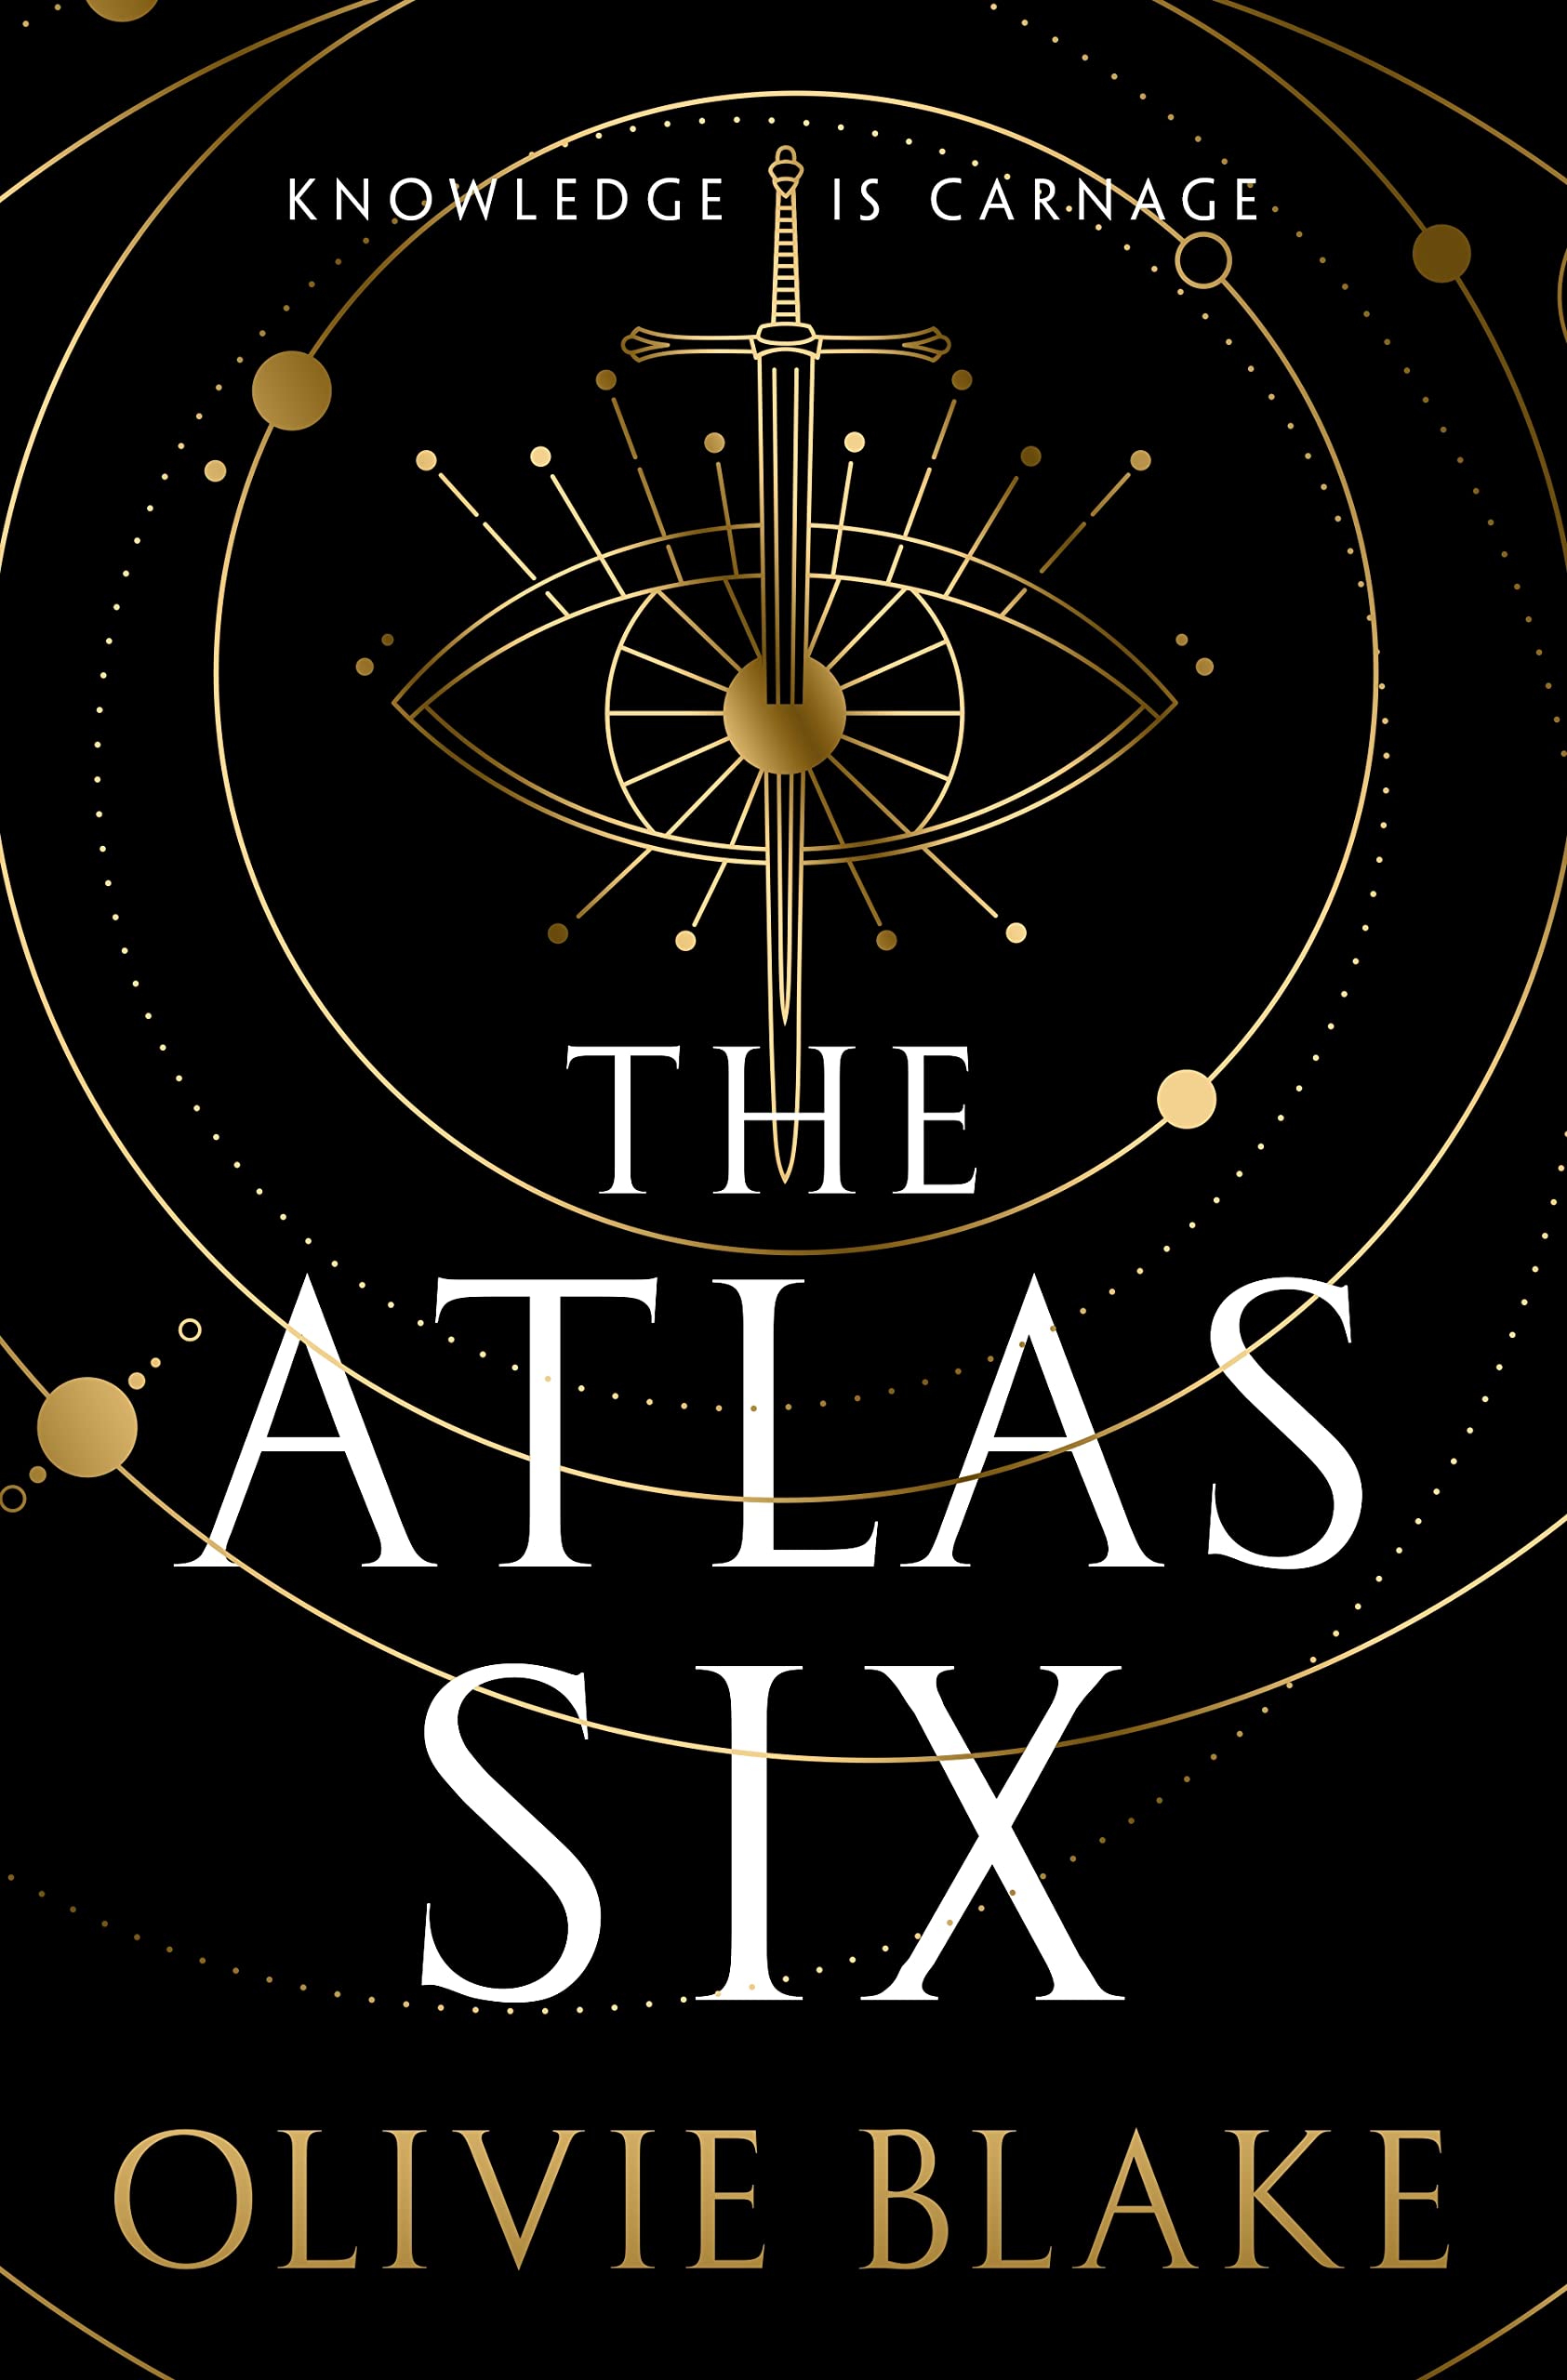 Cover of “The Atlas Six” by Olivia Blake